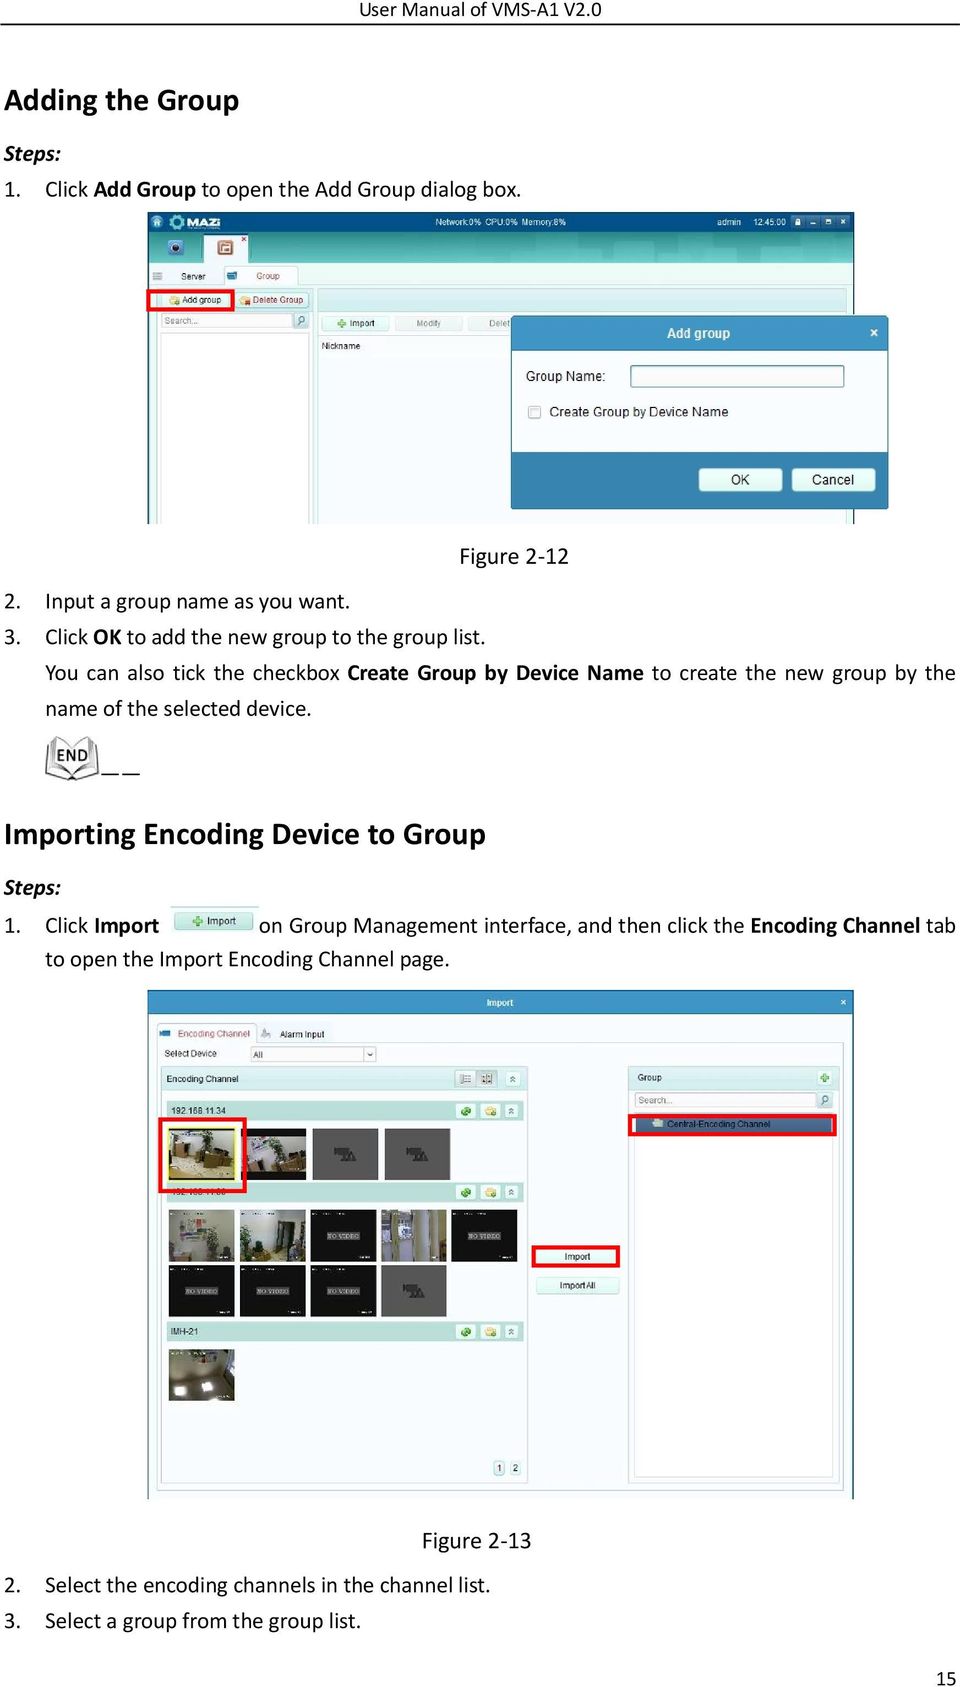 You can also tick the checkbox Create Group by Device Name to create the new group by the name of the selected device.